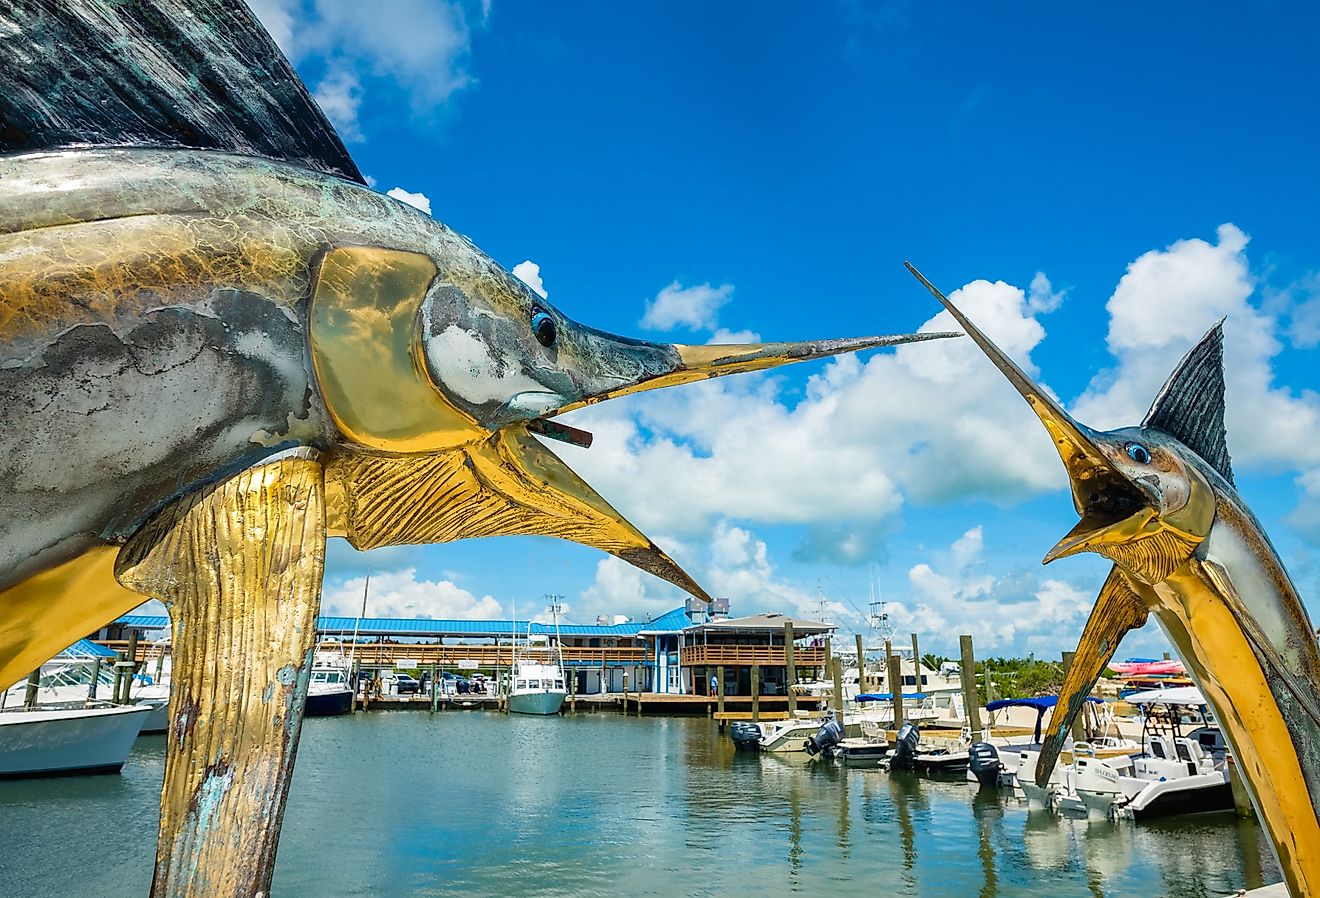 The Whale Harbor Marina in Islamorada, Florida is a popular tourist destination for the rental of yachts for fishing excursions in the beautiful Florida Keys. Image credit Fotoluminate LLC via Shutterstock